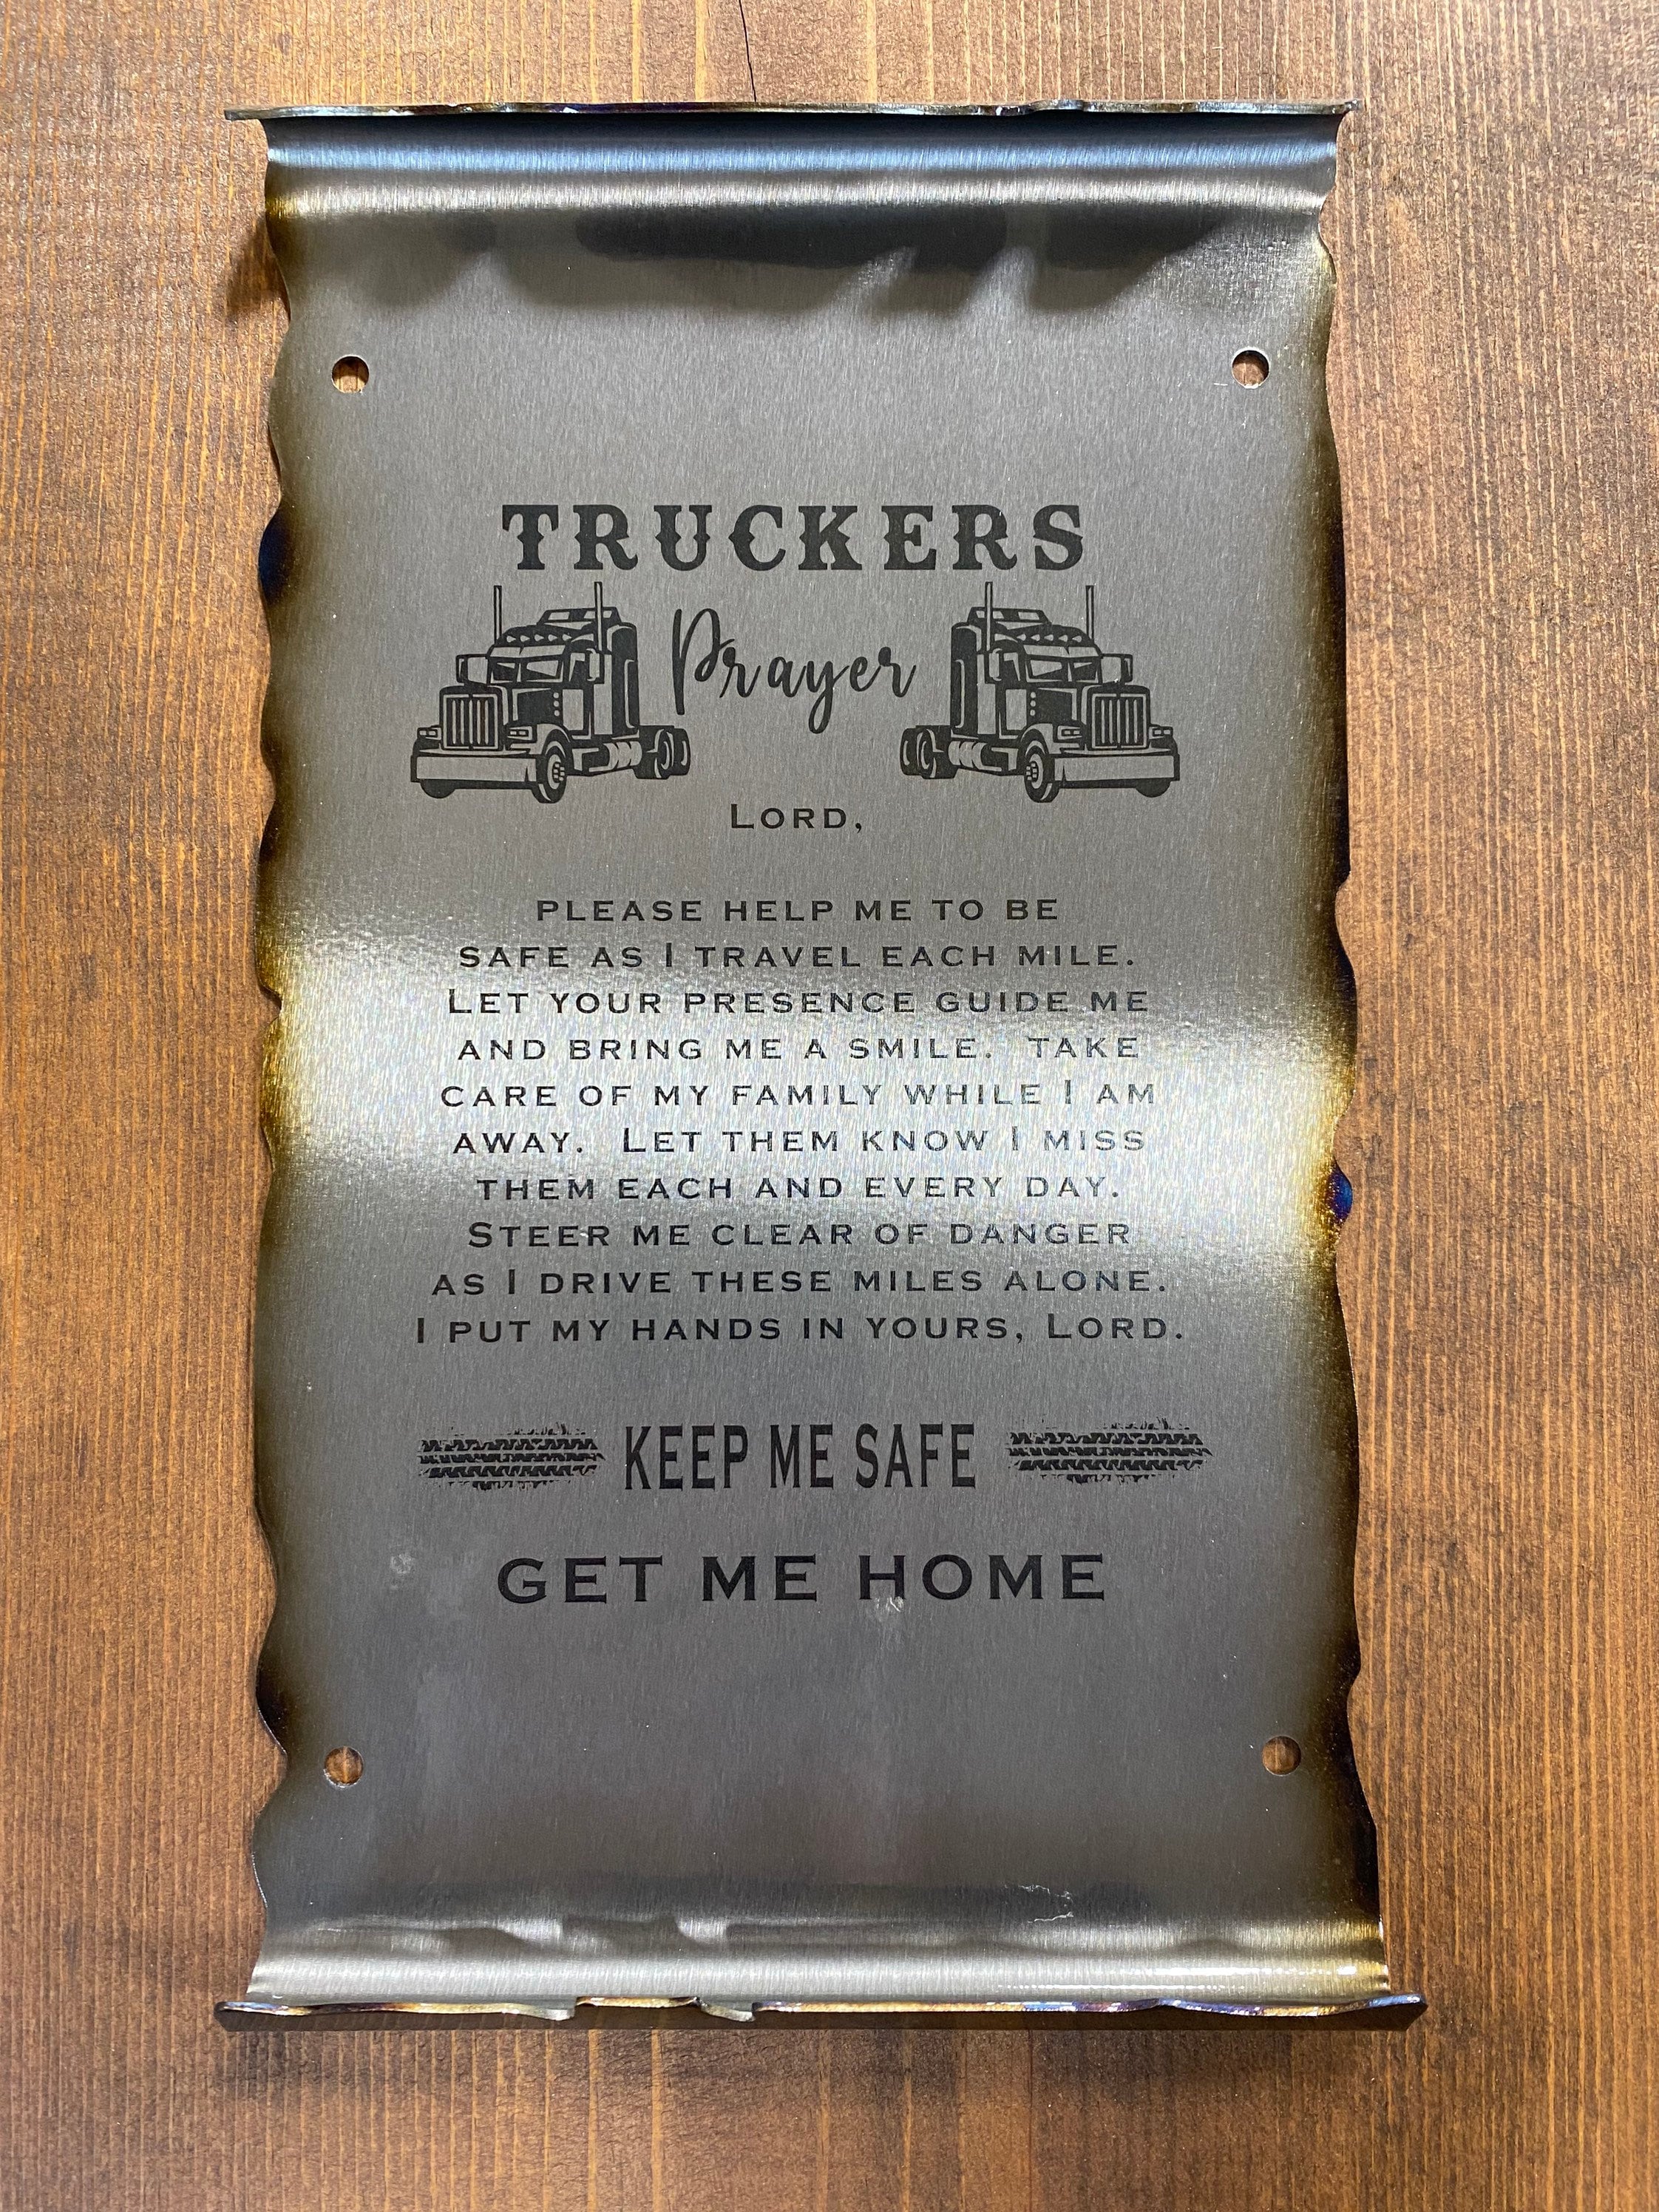 Truck Driver Gifts, A Trucker's Prayer, Trucker Gift, 18 Wheeler Birthday  Gift, Personalized Gifts, Sentimental Gift, Father's Day Gifts 